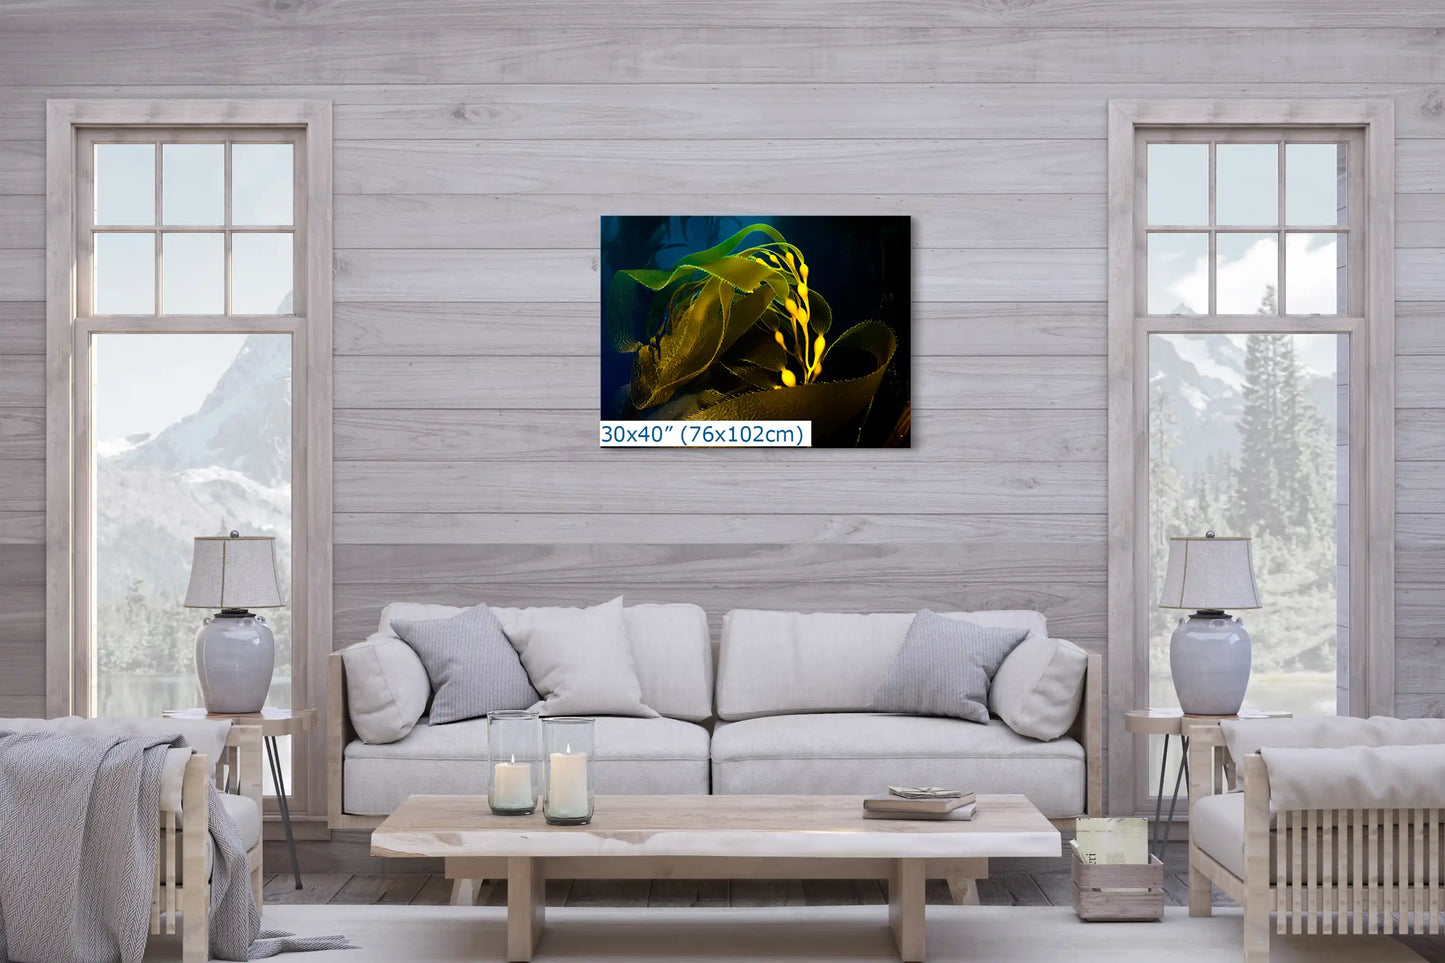 A large 30x40 inch canvas print of an underwater kelp scene creating a focal point in a contemporary living room.